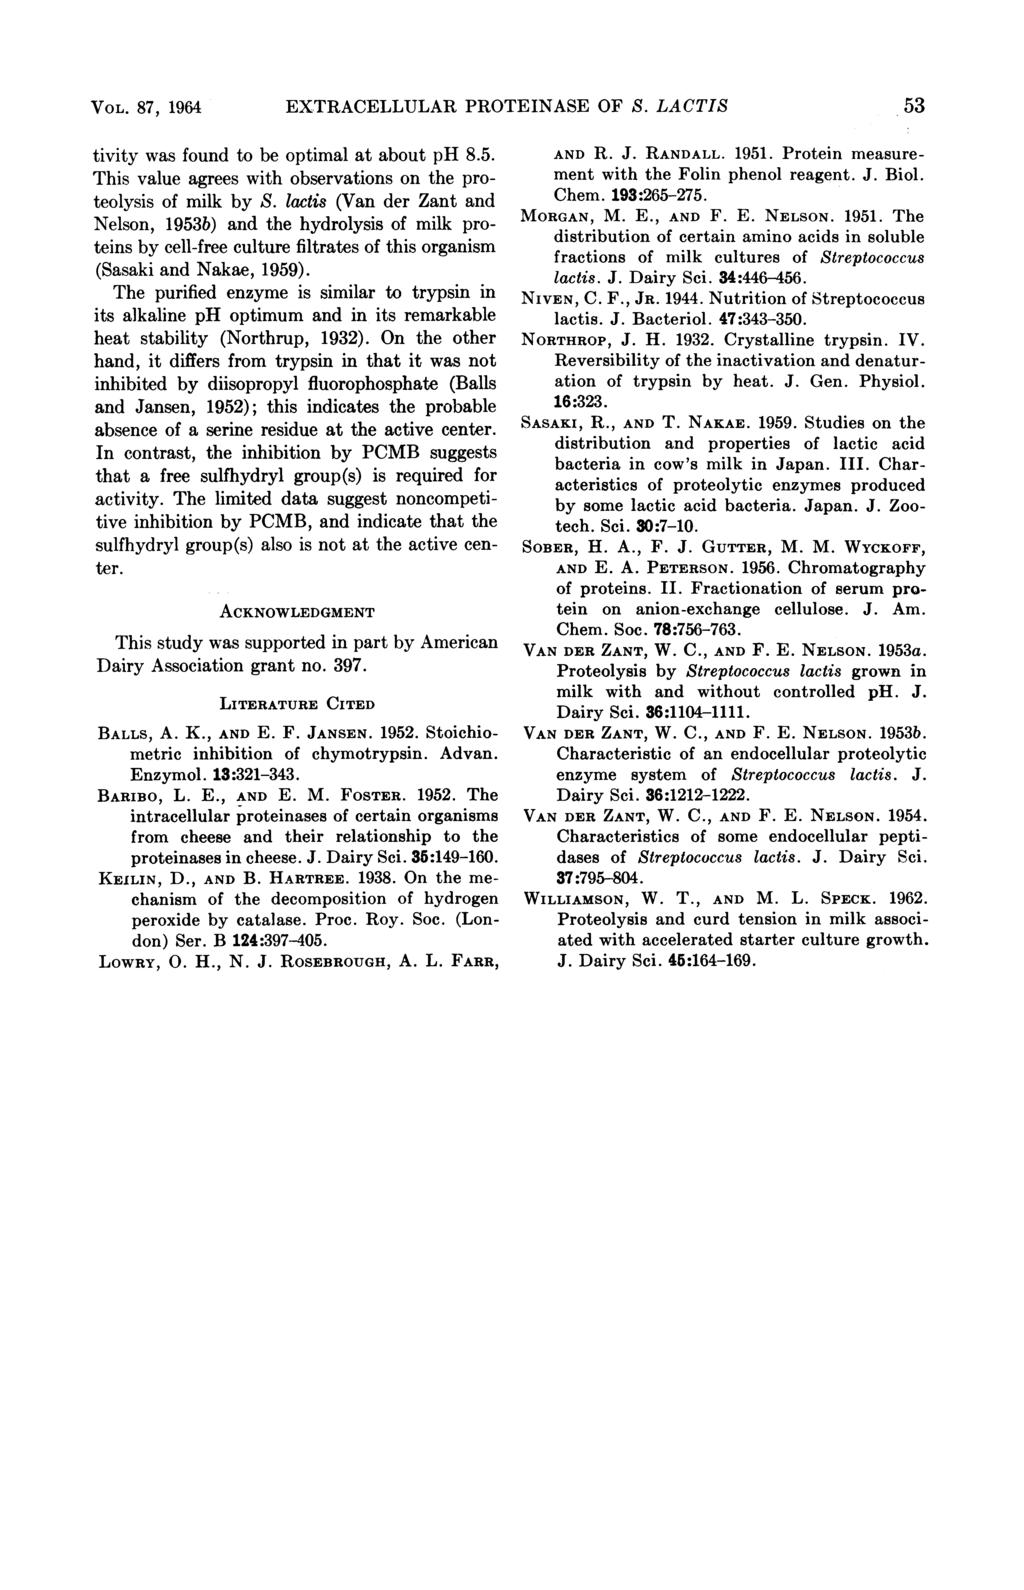 VOL. 87, 1964 EXTRACELLULAR PROTEINASE OF S. LACTIS 53 tivity as found to be optimal at about ph 8.5. This value agrees ith observations on the proteolysis of milk by S.